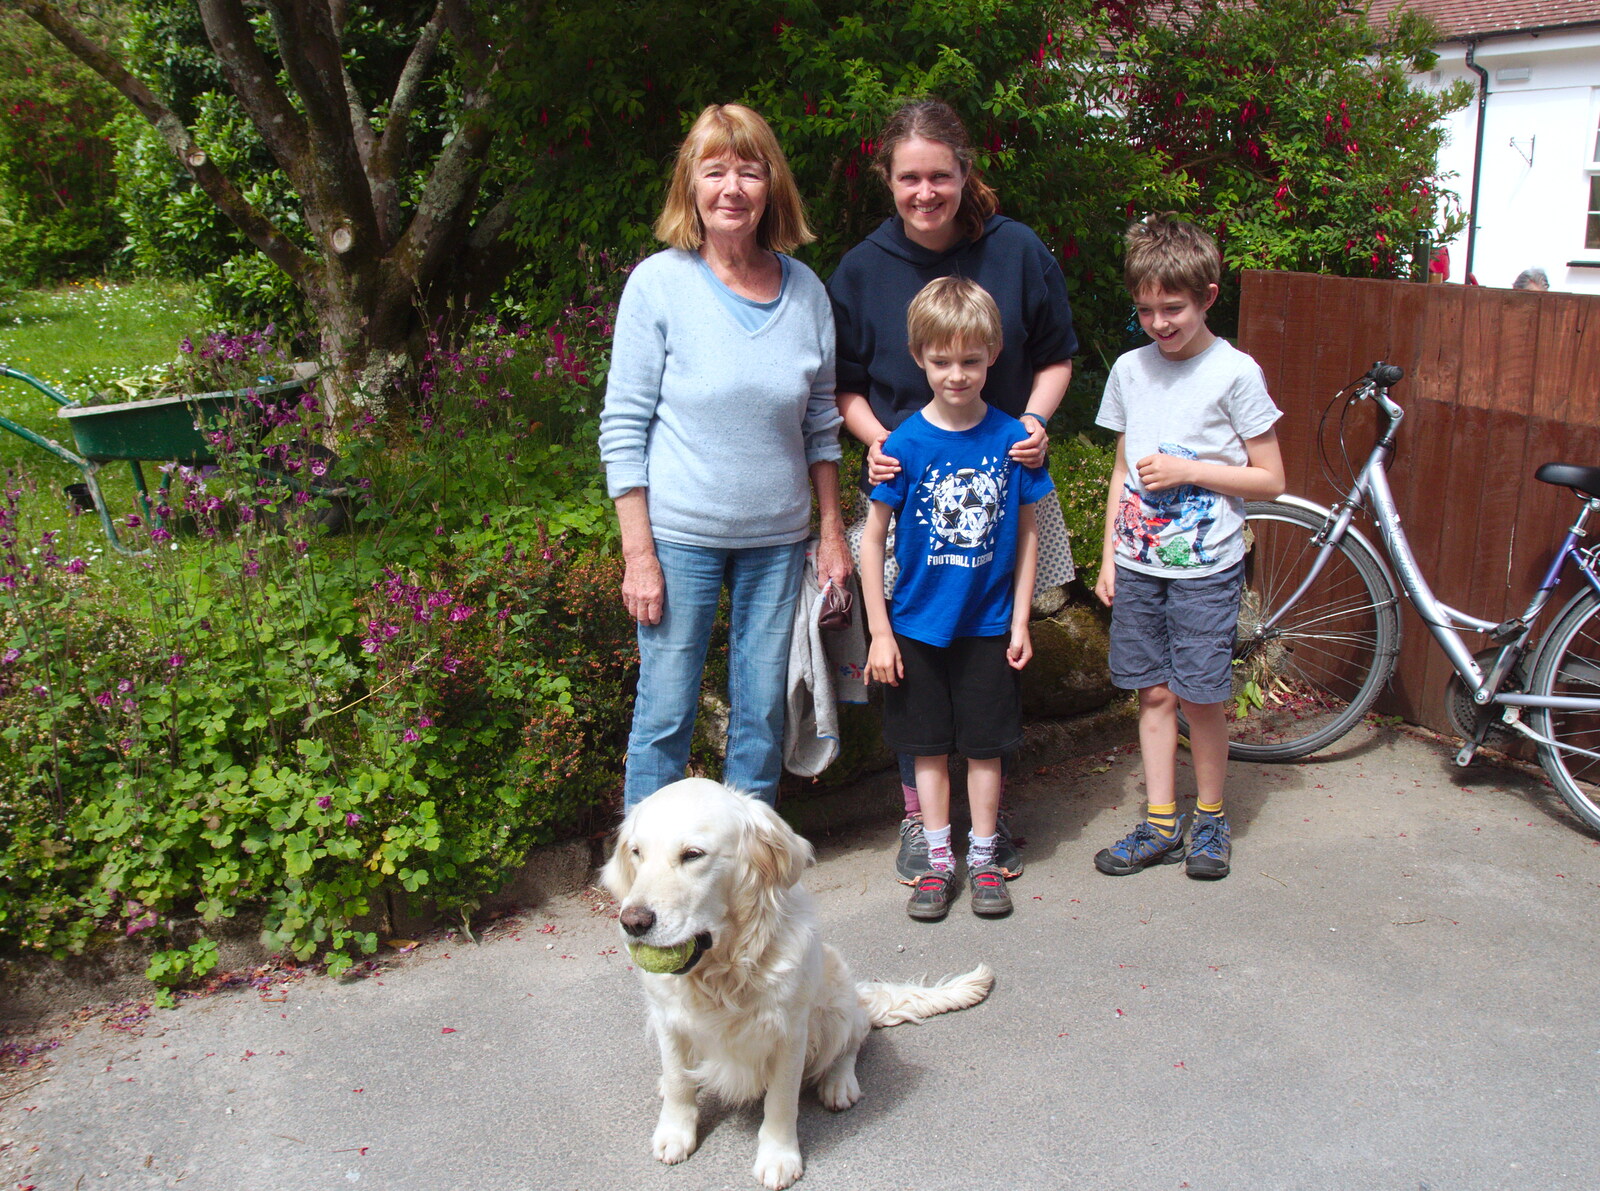 We get a photo with a borrowed golden retriever from The Tom Cobley and a Return to Haytor, Bovey Tracey, Devon - 27th May 2019